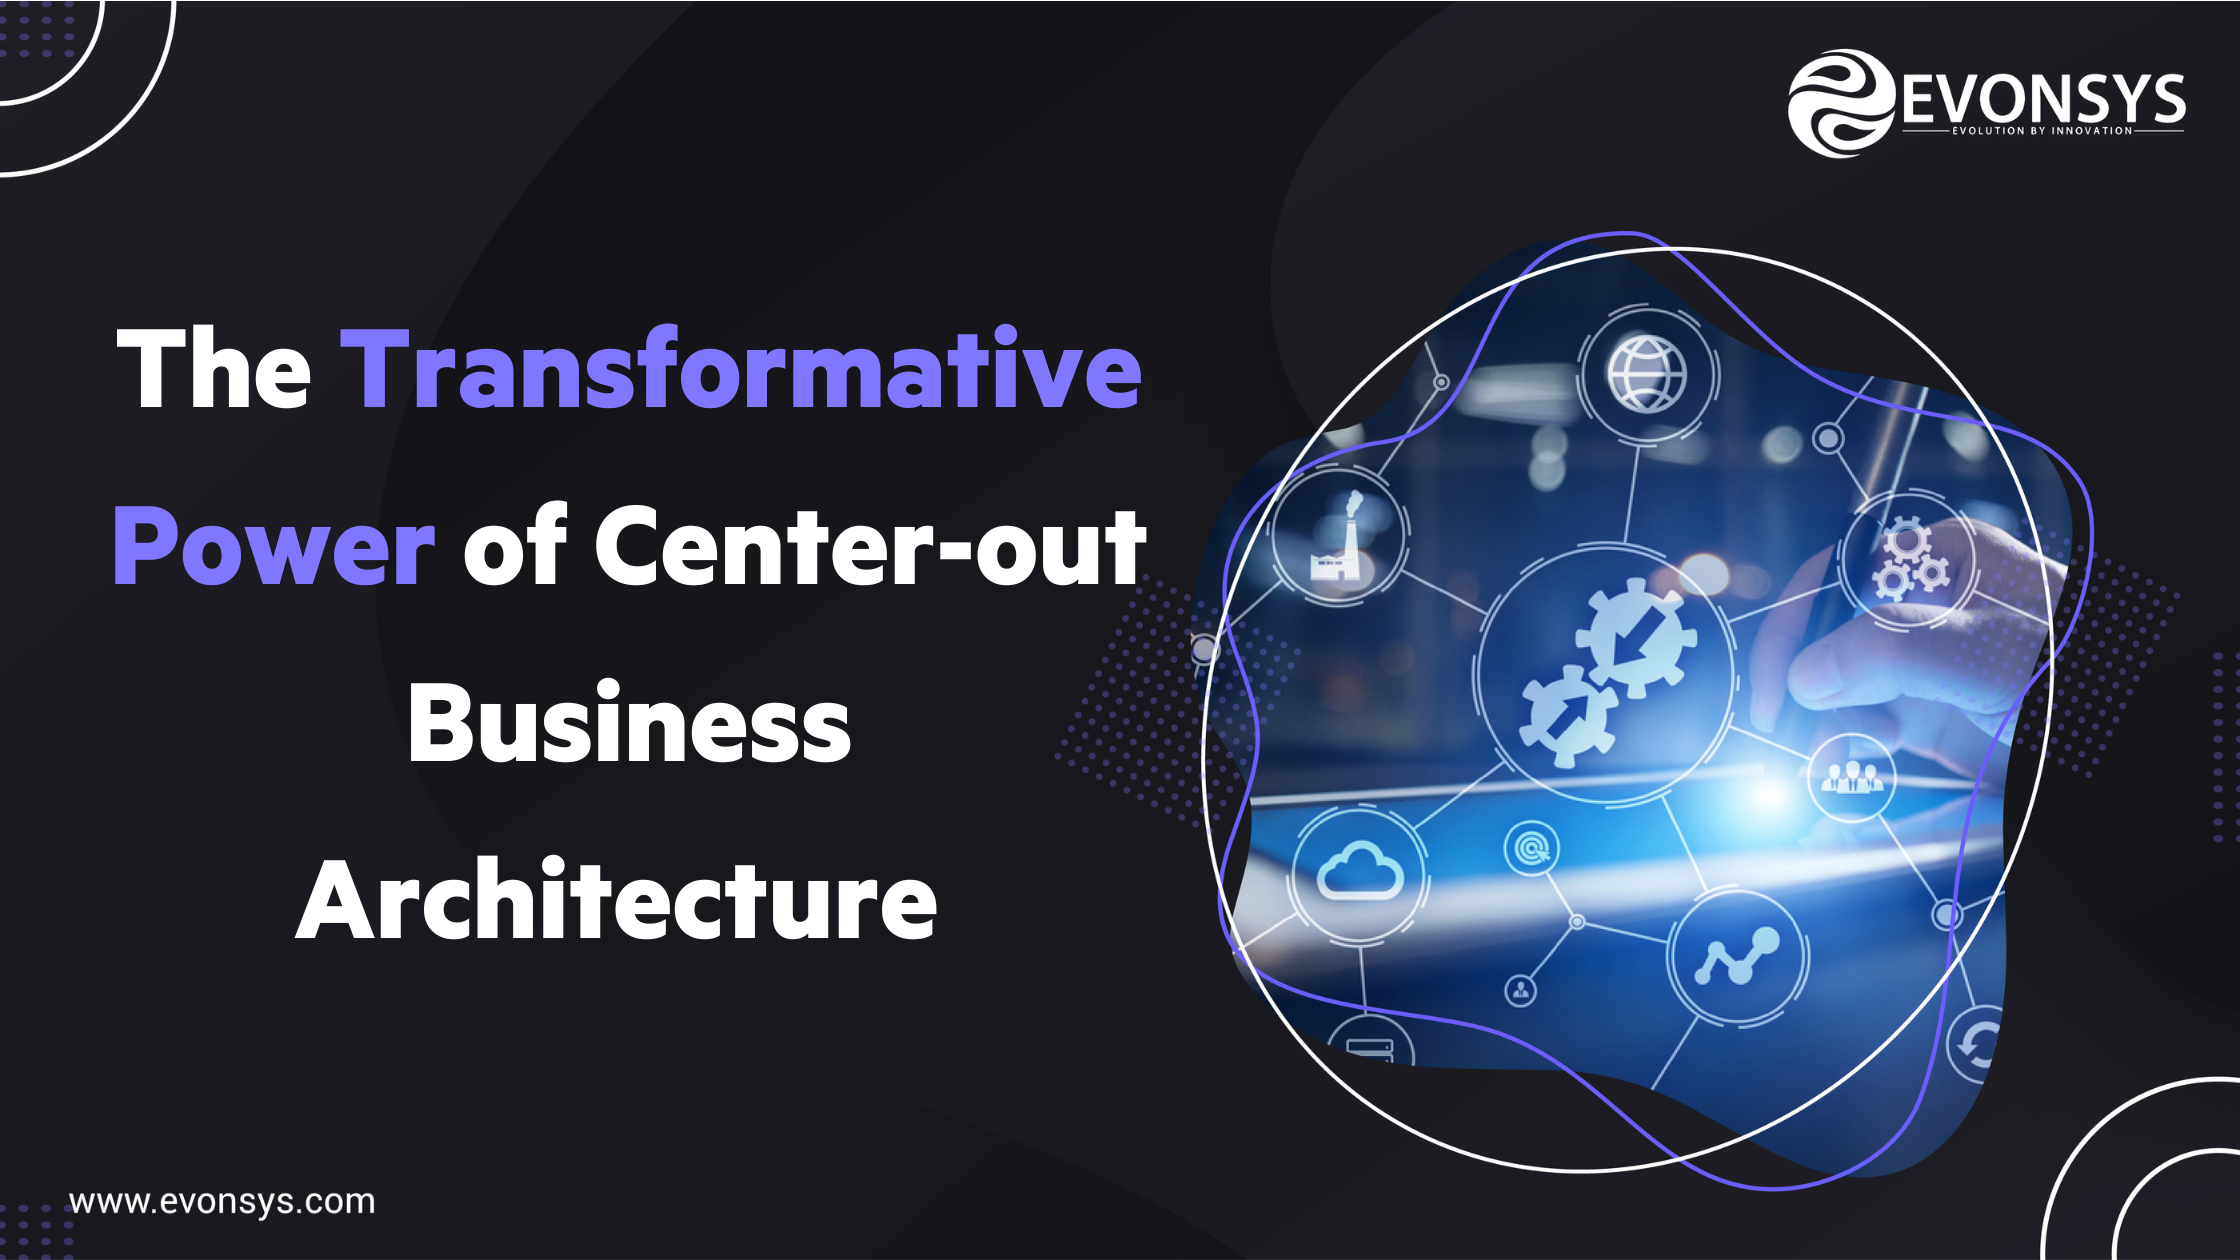 EvonSys_The Transformative Power of Center-out Business Architecture 